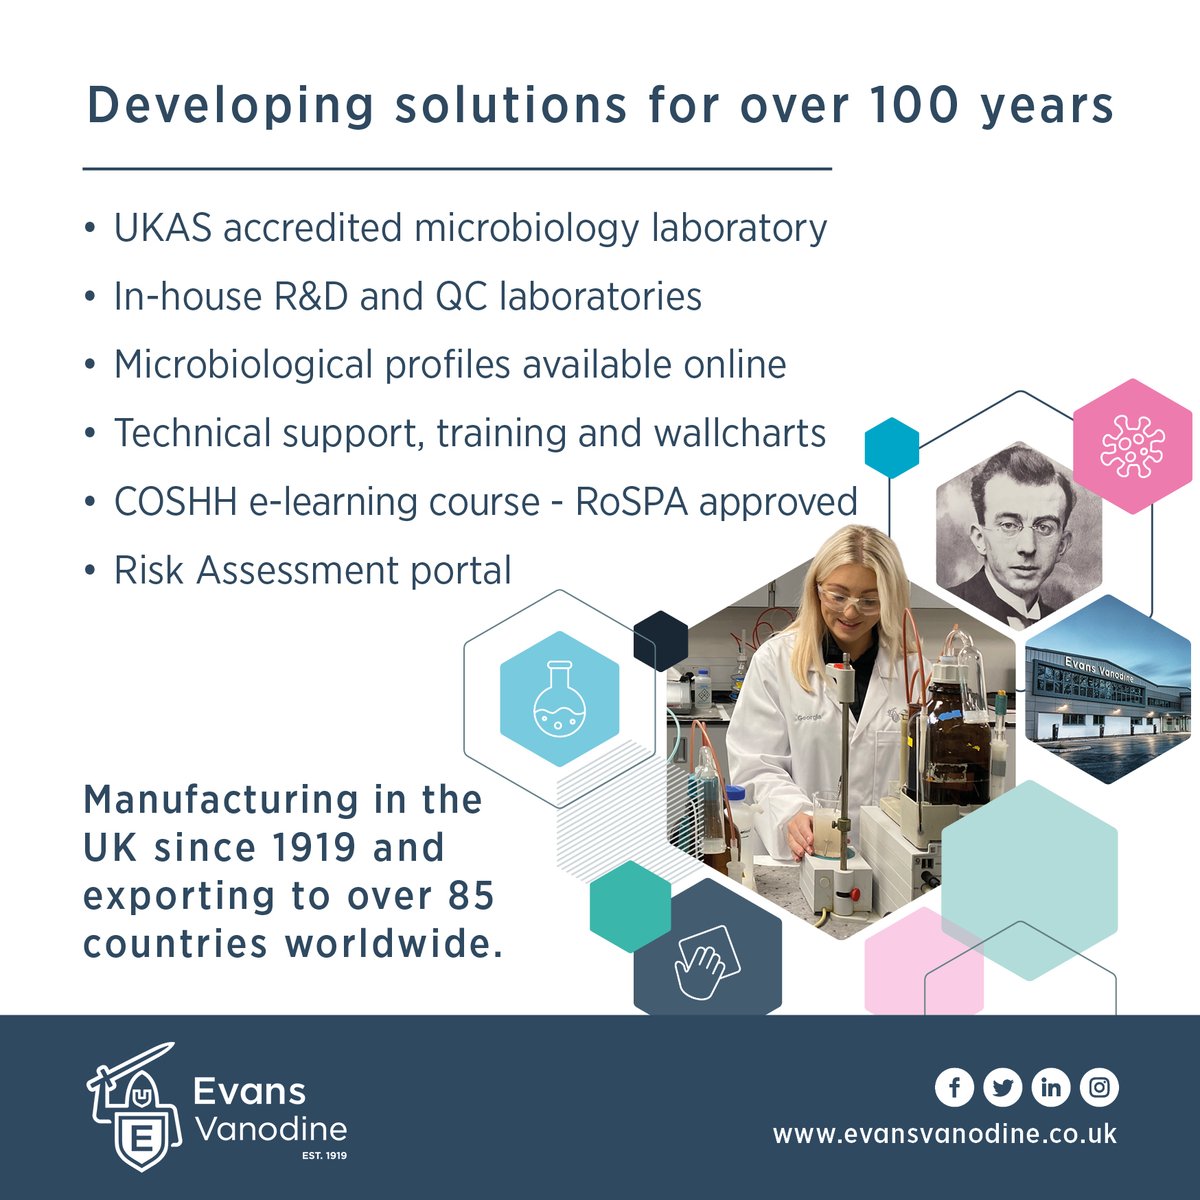 We've been developing solutions & manufacturing in the UK for over 100 years. With 3 in-house laboratories & a team of experts offering training & technical support, we are proud to serve our industries.
#CleaningandHygiene #UKMfg #ProfessionalHygiene #LivestockProtection